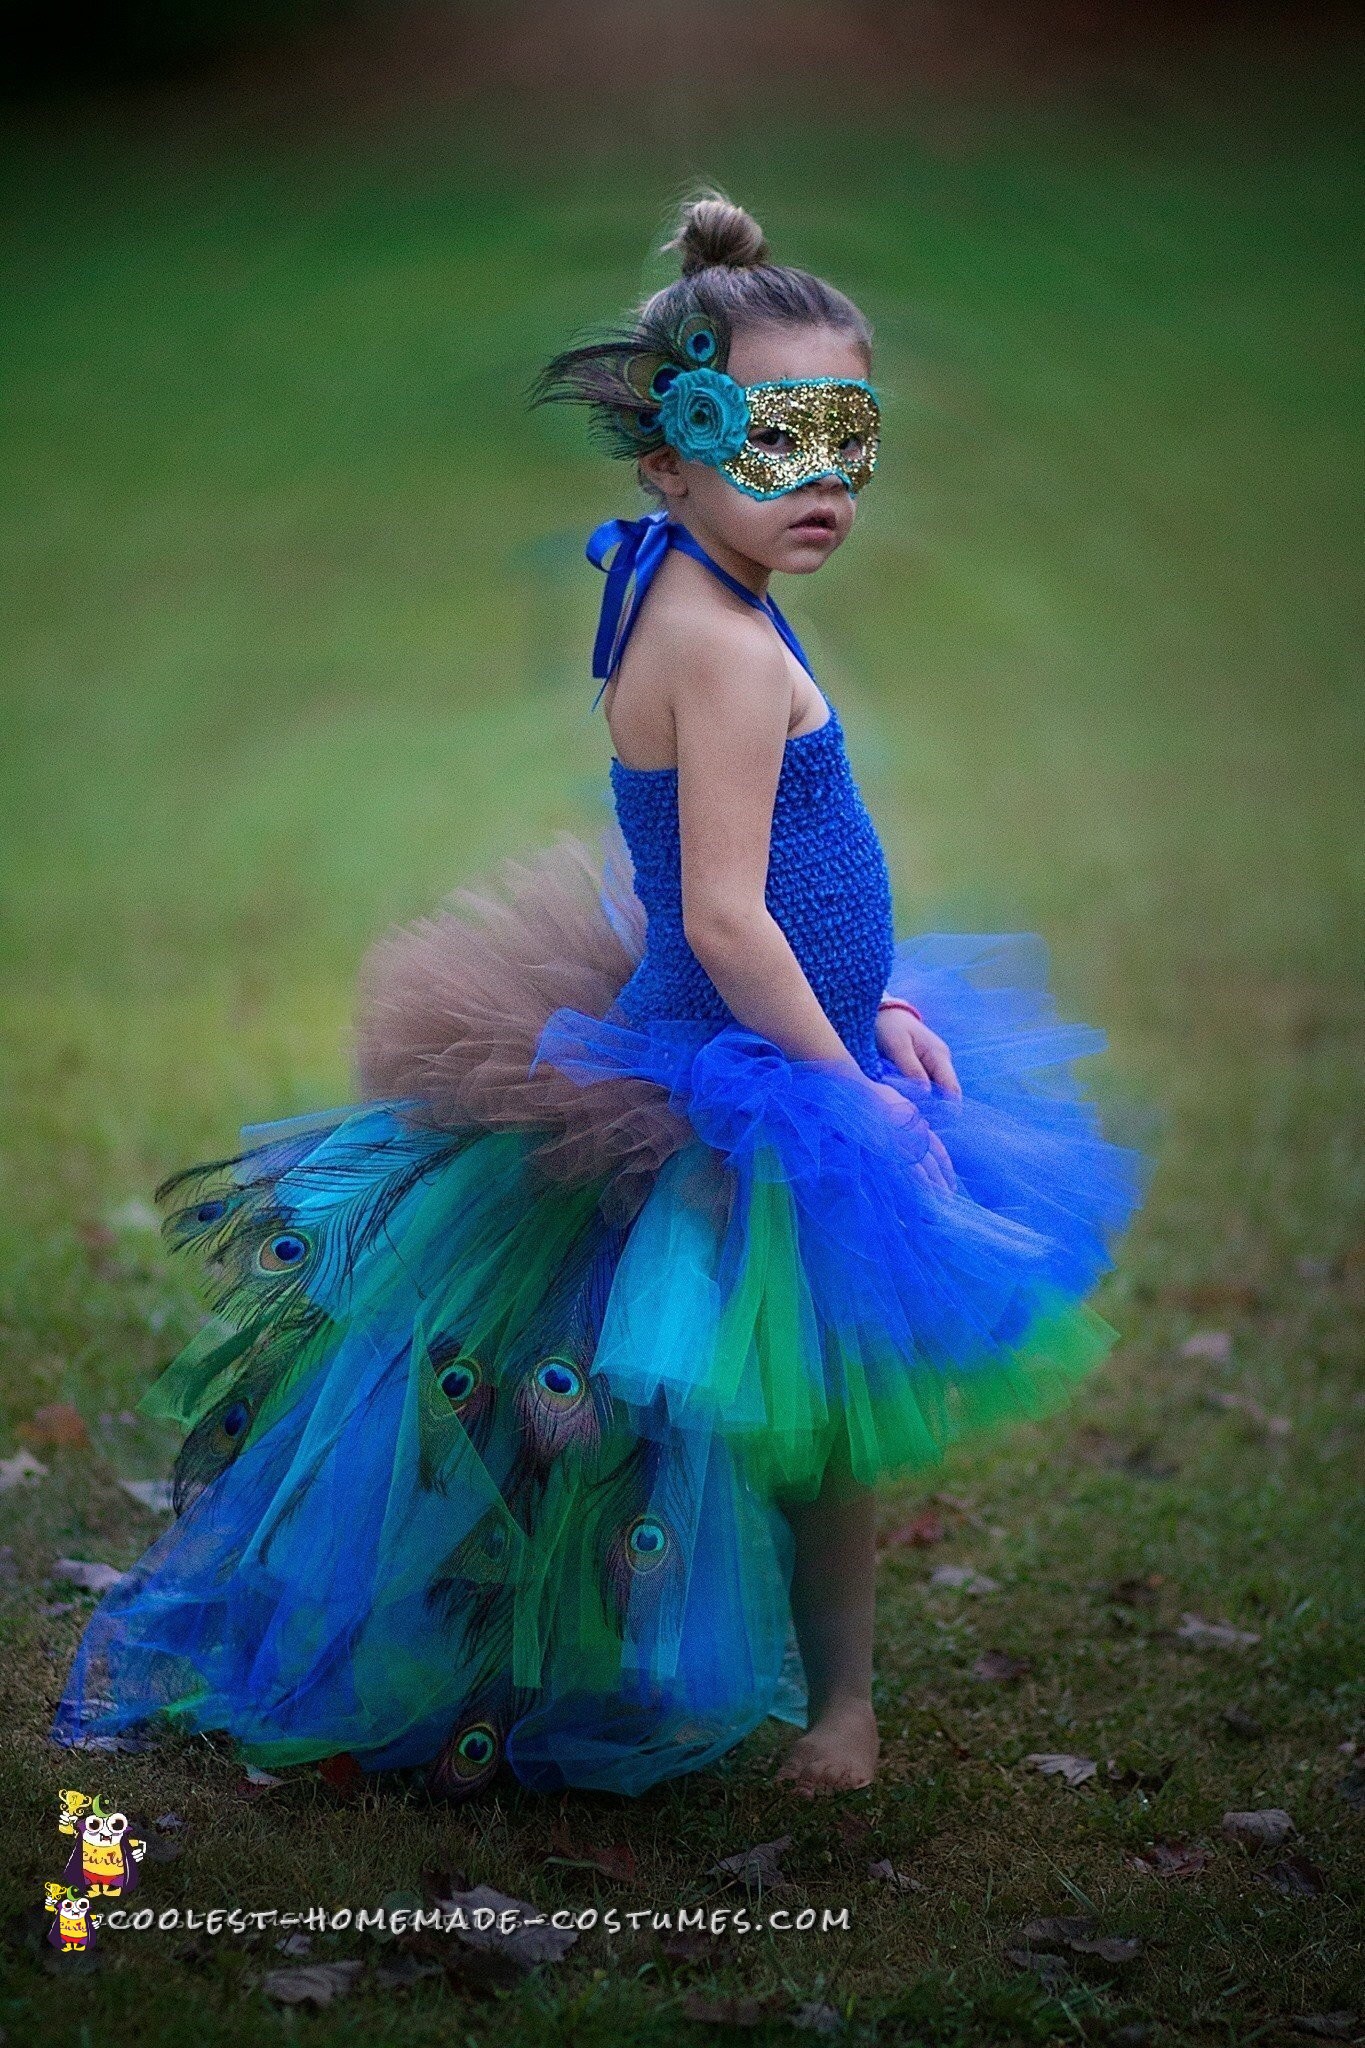 Pretty Homemade Peacock Costume for a Girl